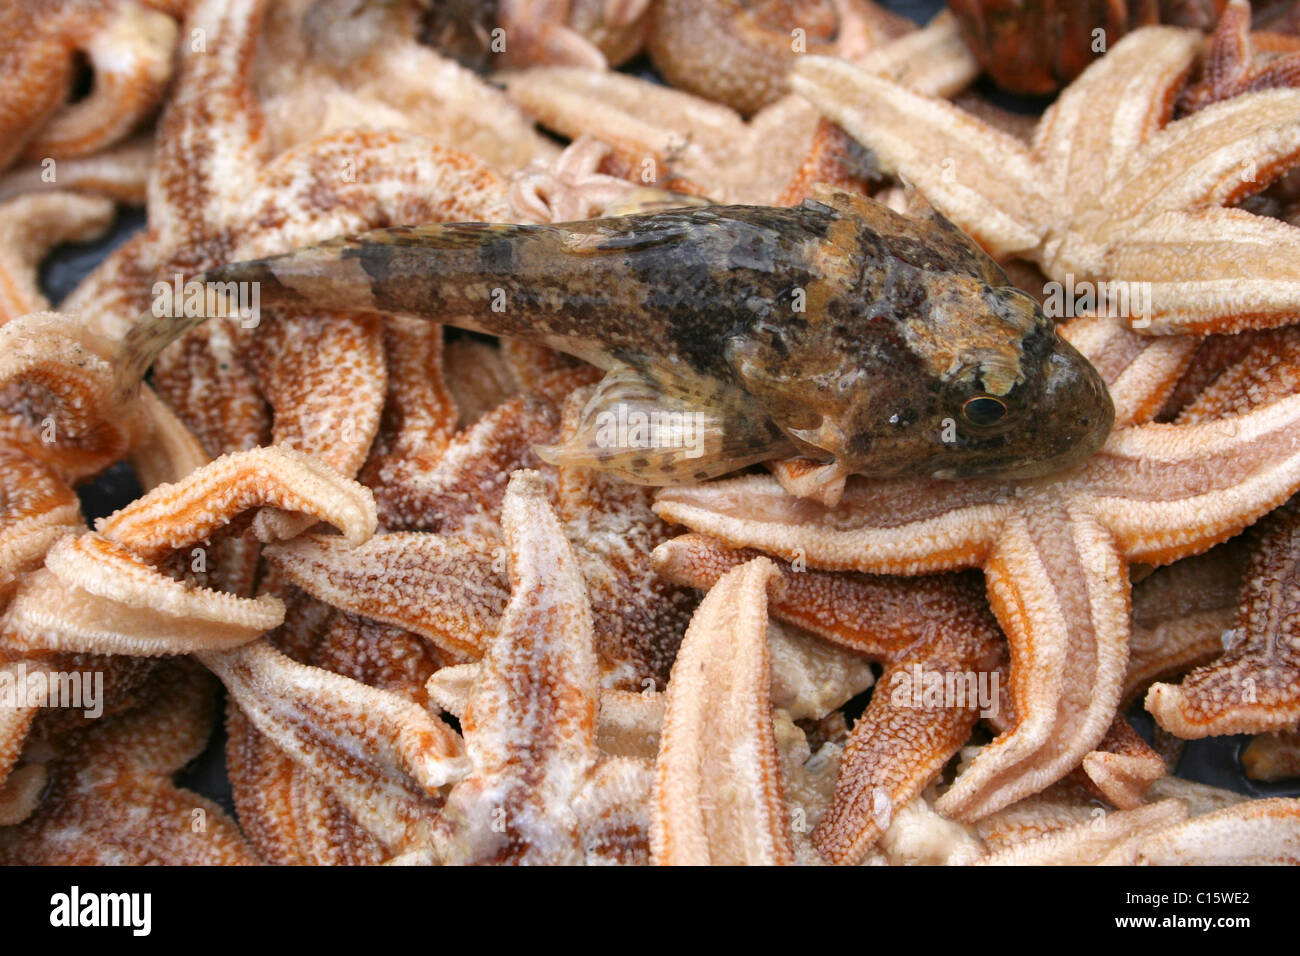 Shanny Lipophrys pholis On A Bed Of Common Starfish Asterias rubens Caught During Beamtrawling In The River Mersey, UK Stock Photo